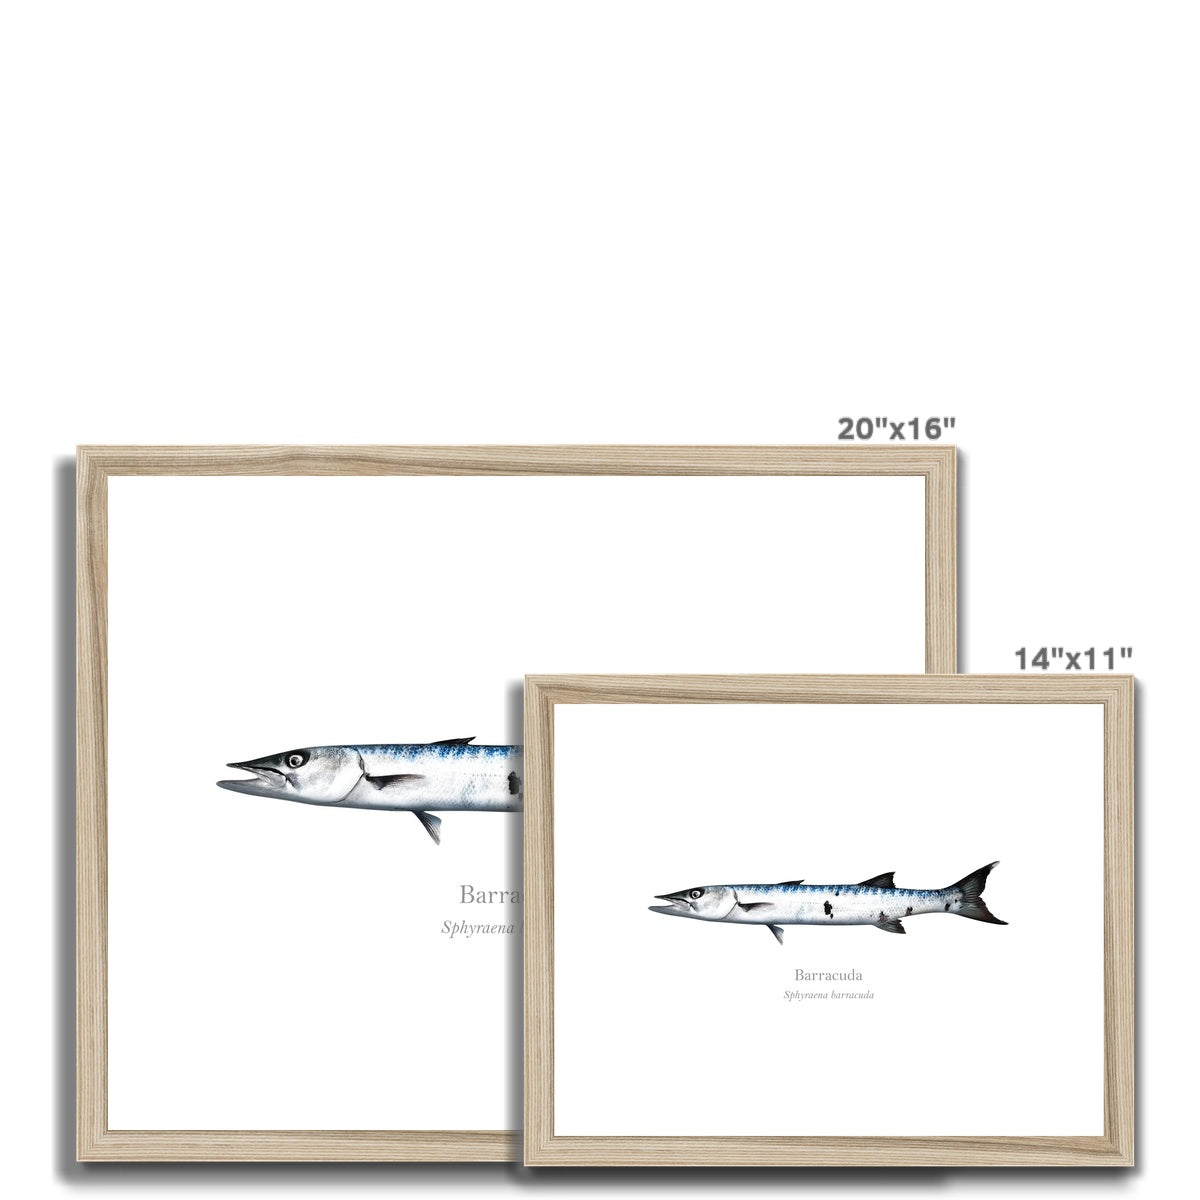 Barracuda - Framed & Mounted Print - With Scientific Name